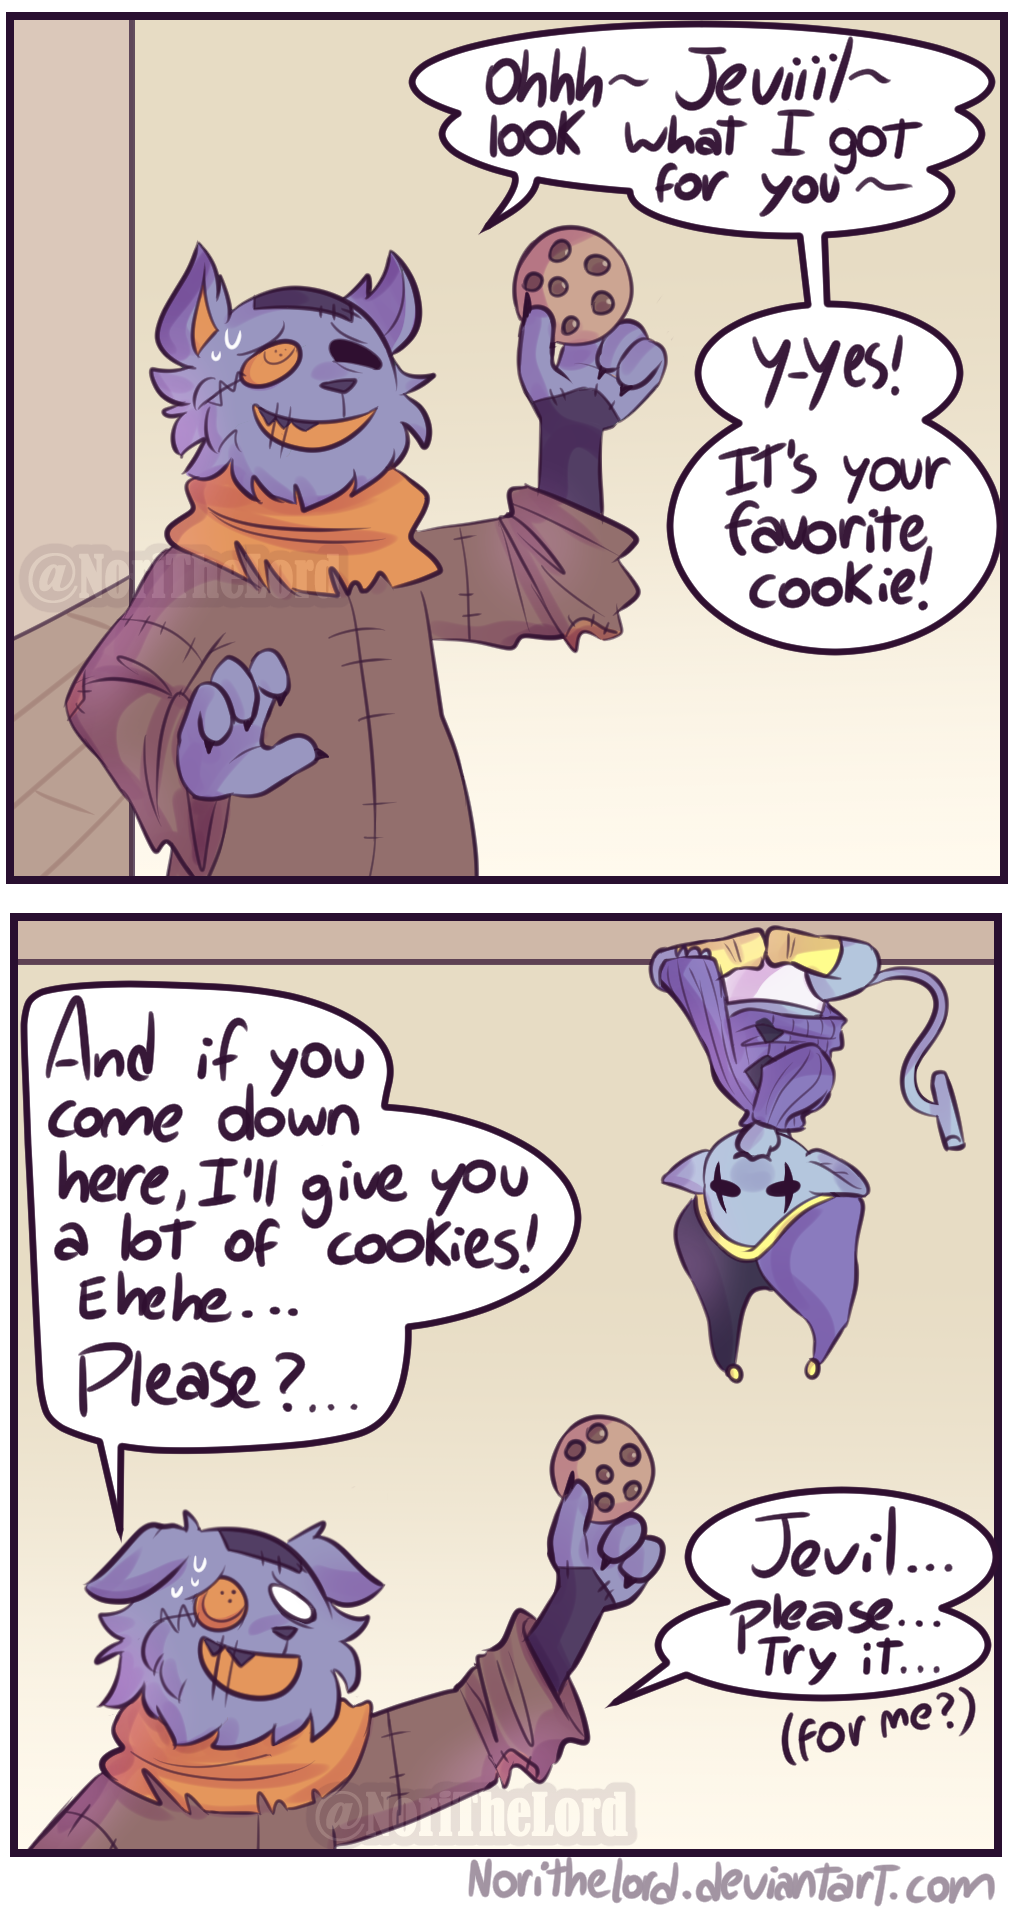 Please come down - Baby Jevil (comic) by NoriTheLord on DeviantArt